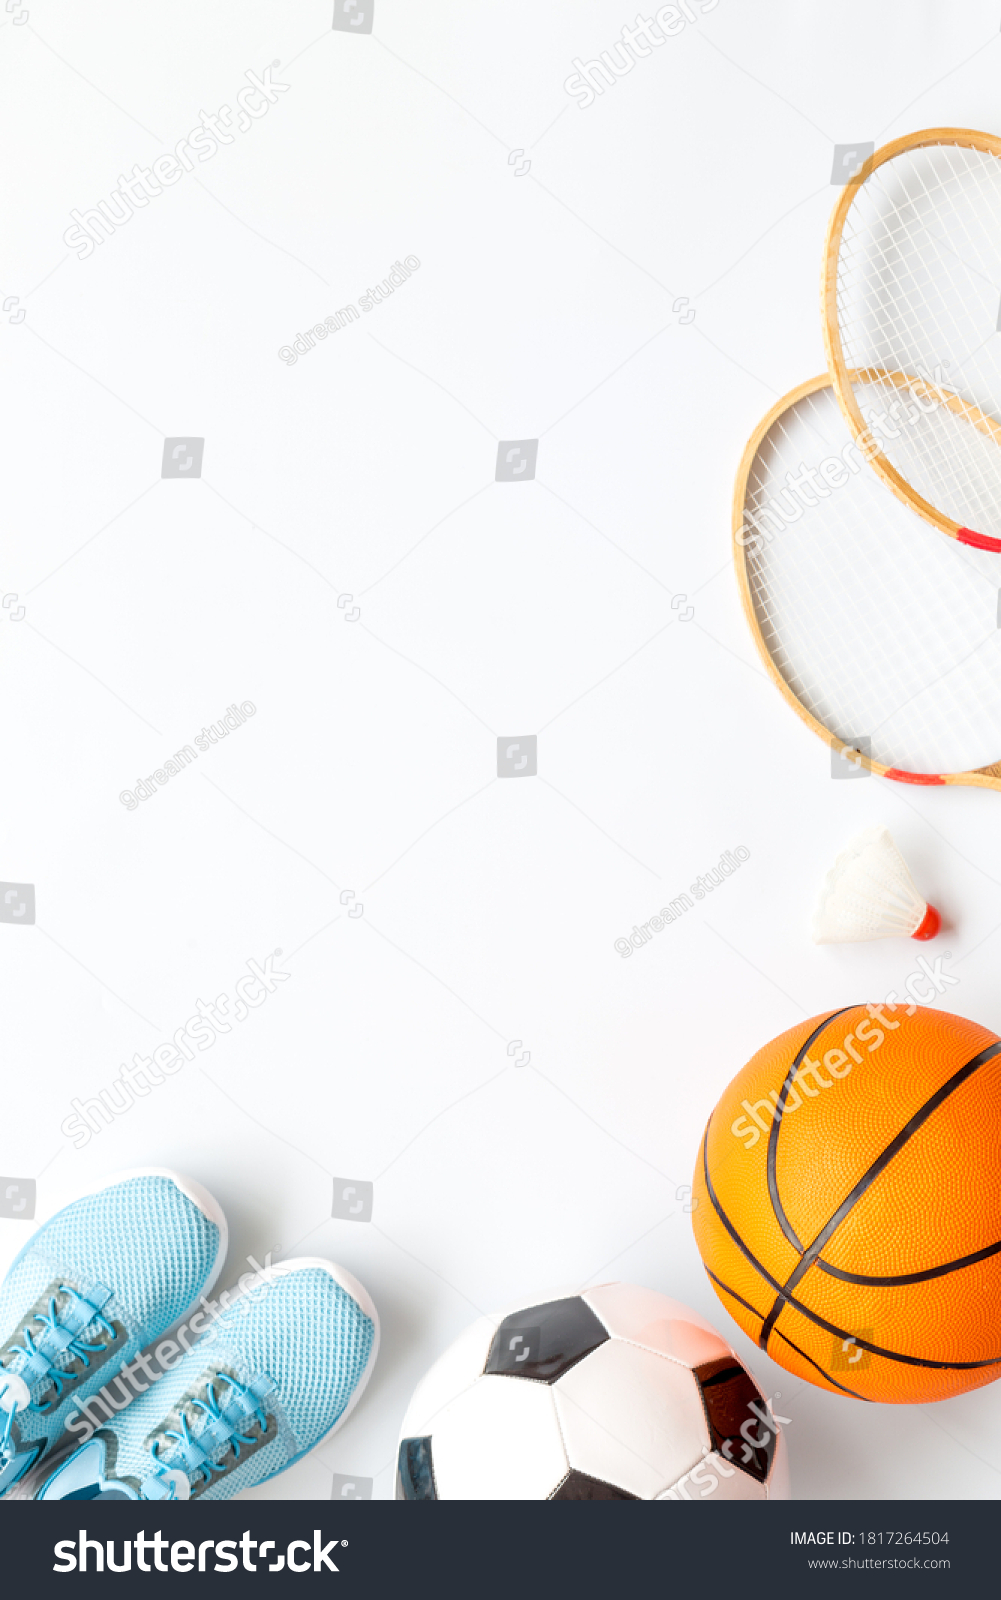 Set of sport games balls and equipment on white baclground. Top view copy space #1817264504